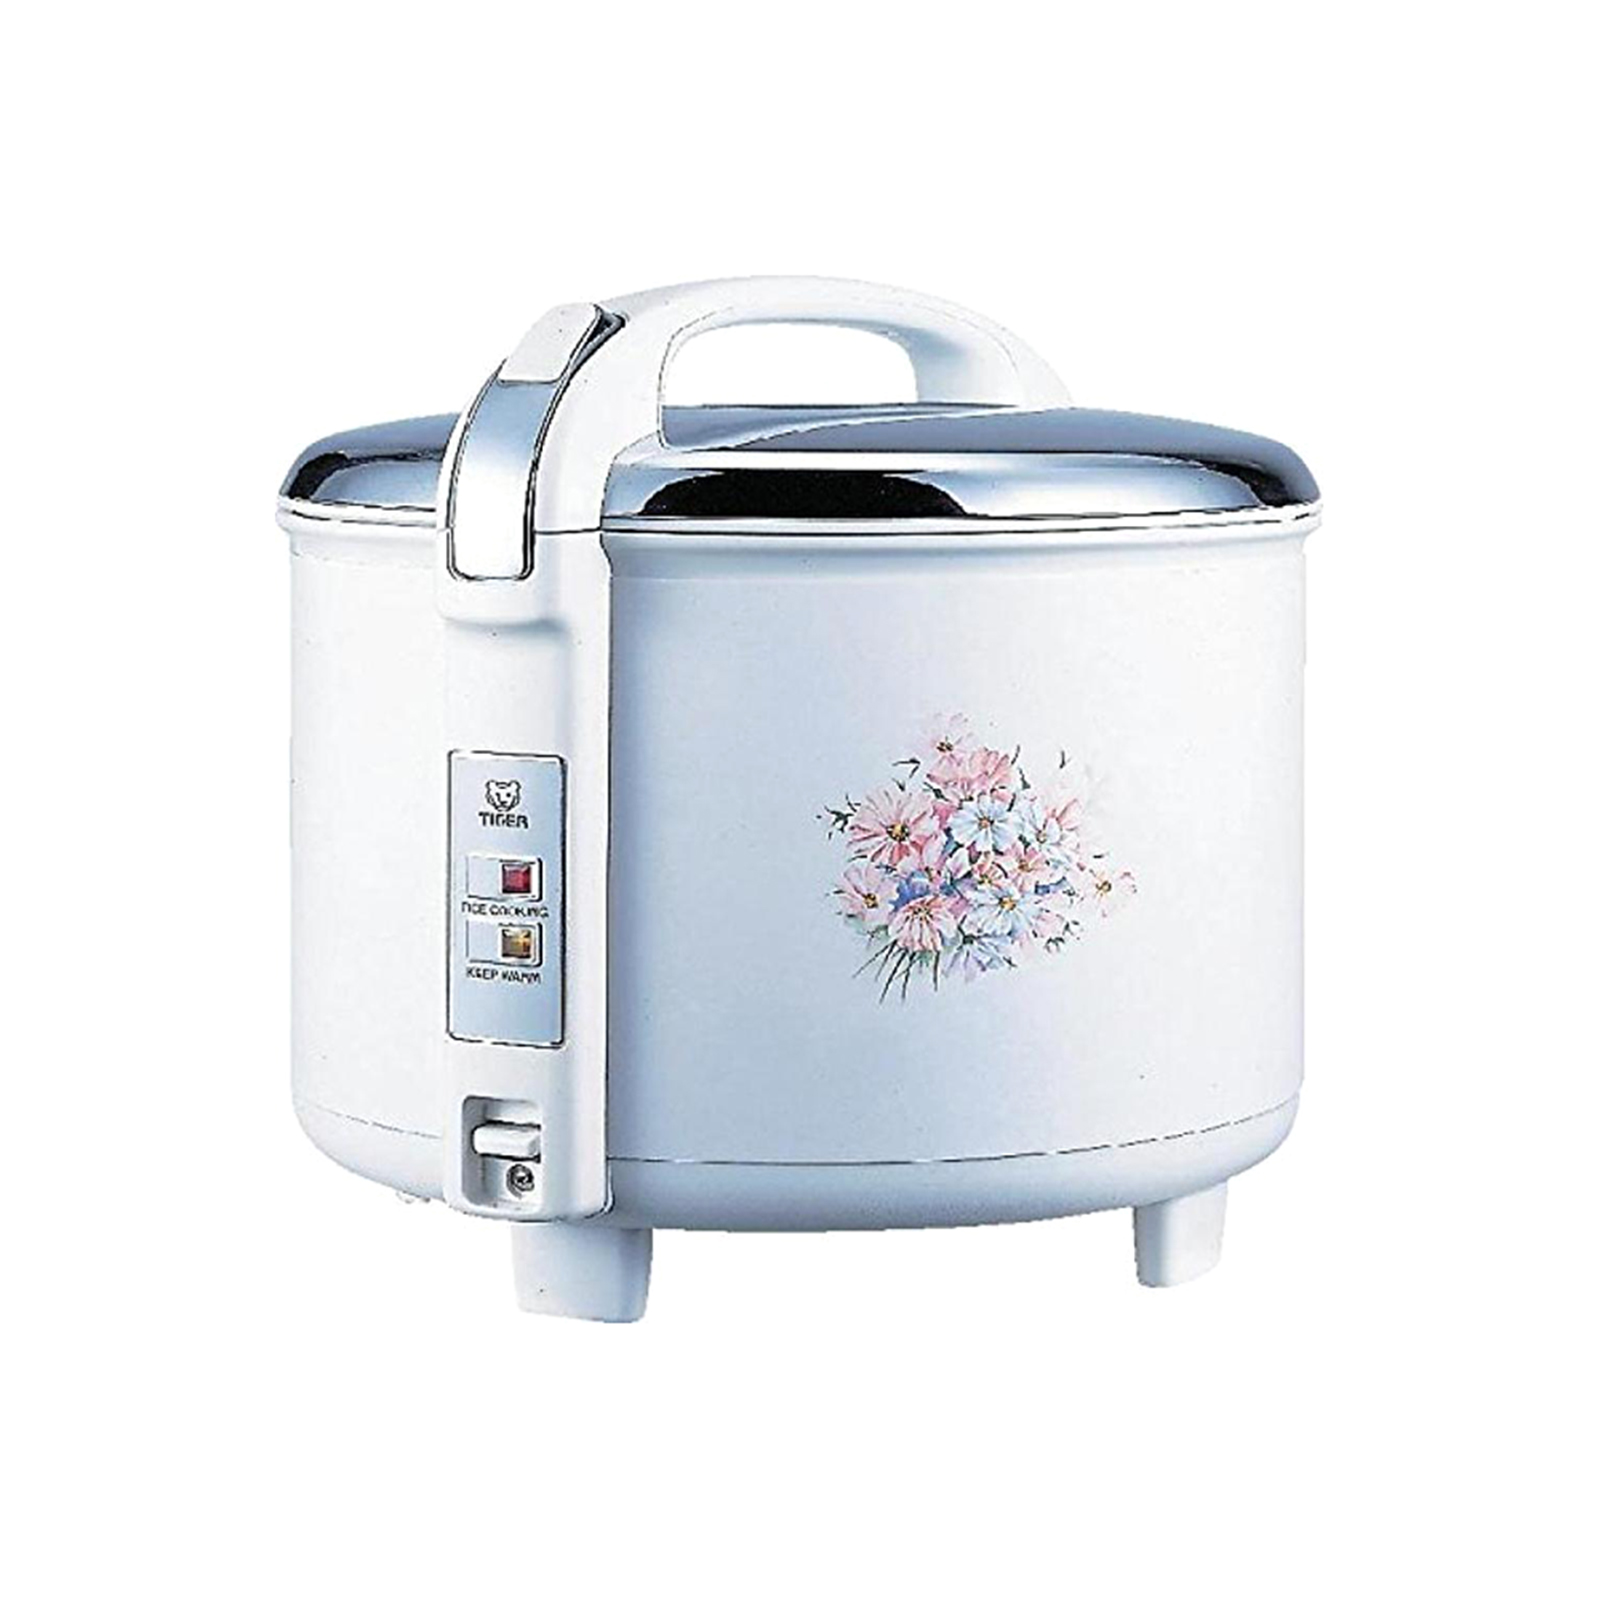 Tiger Corporation JCC-2700-FG  15-Cup Rice Cooker and Warmer with Accessories